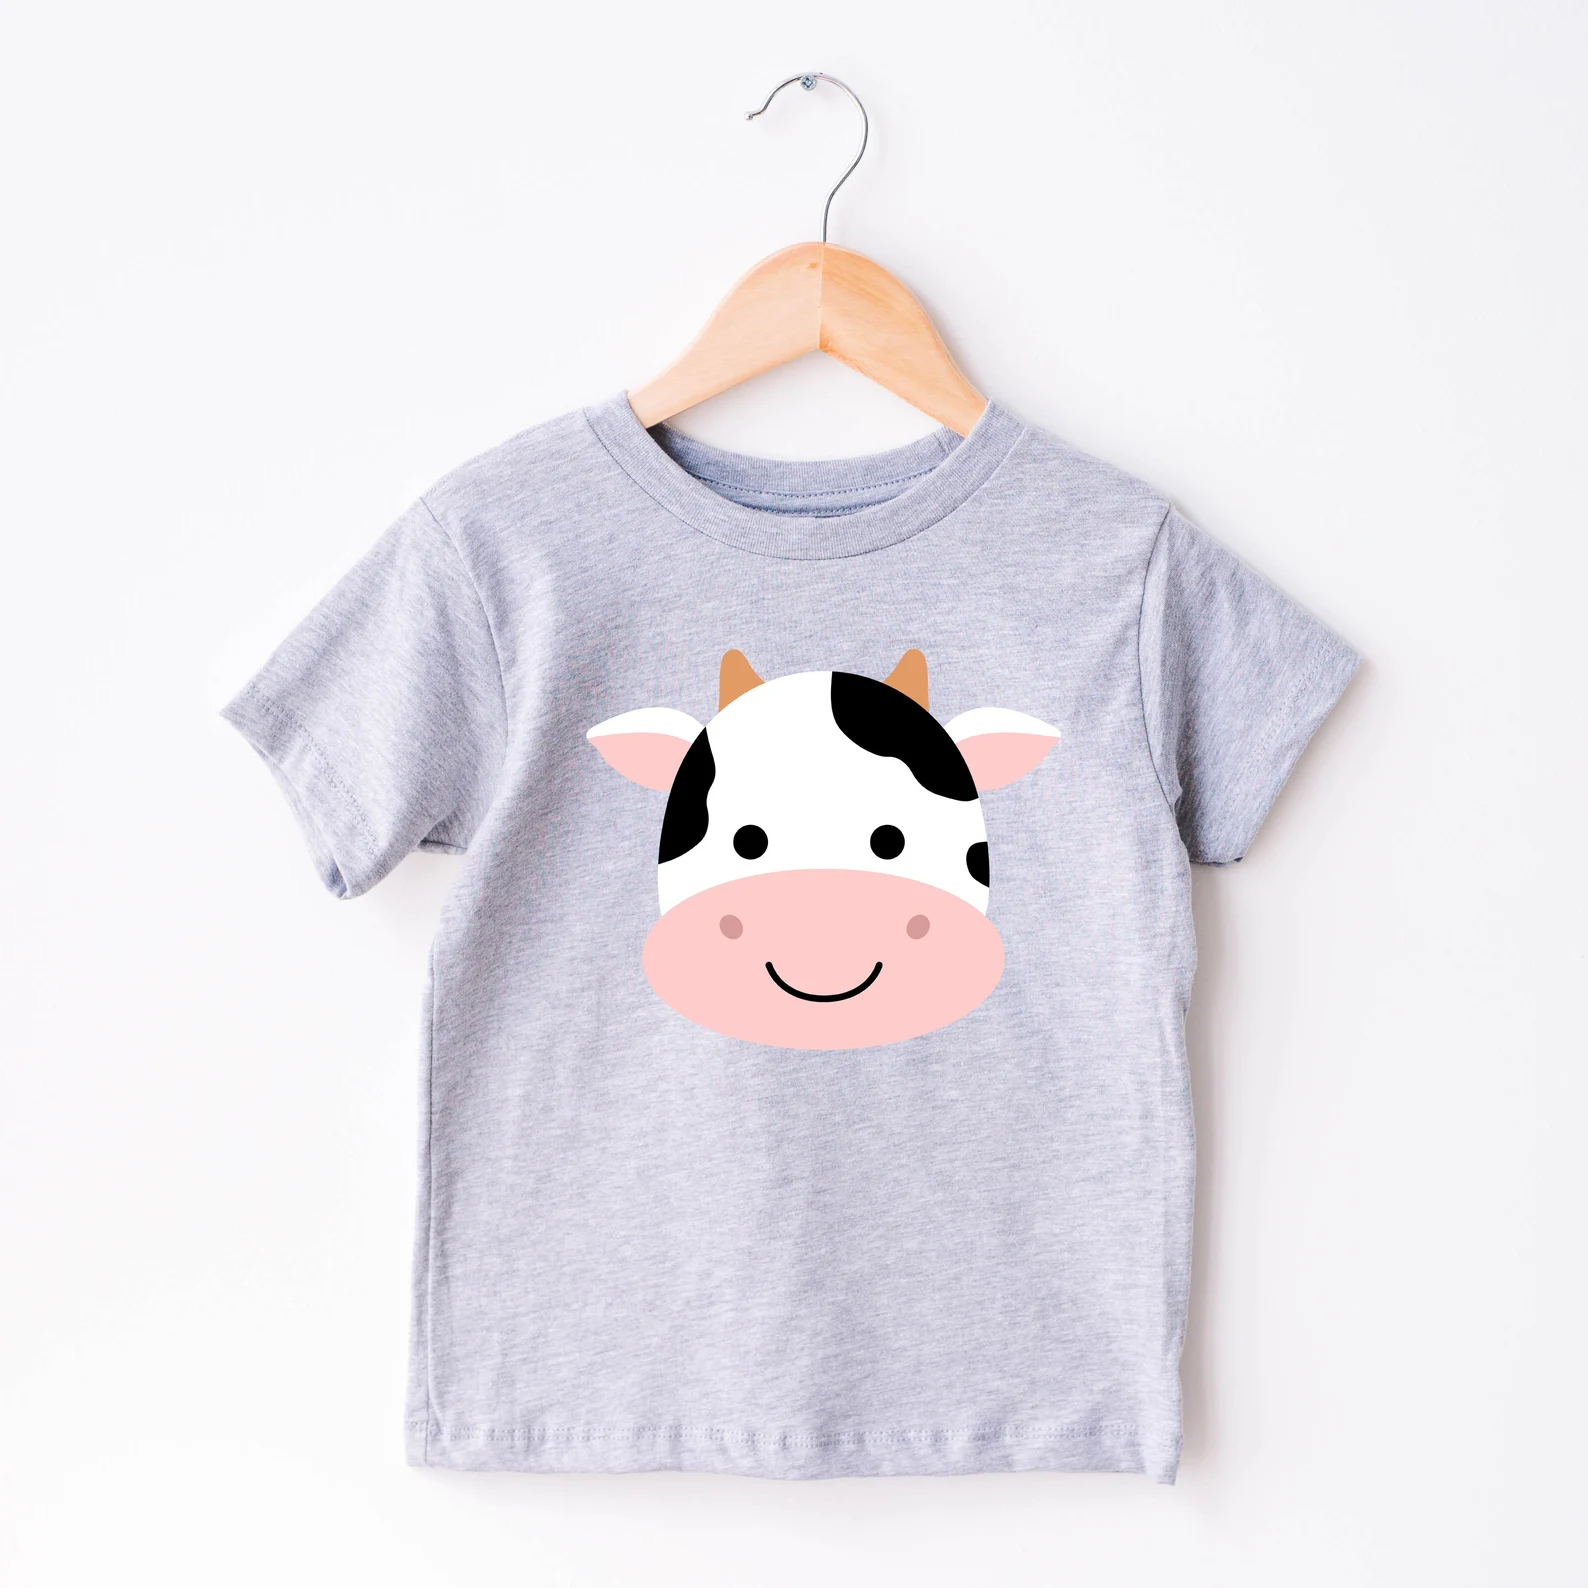 Gray t - shirt with a black and white cow on it.